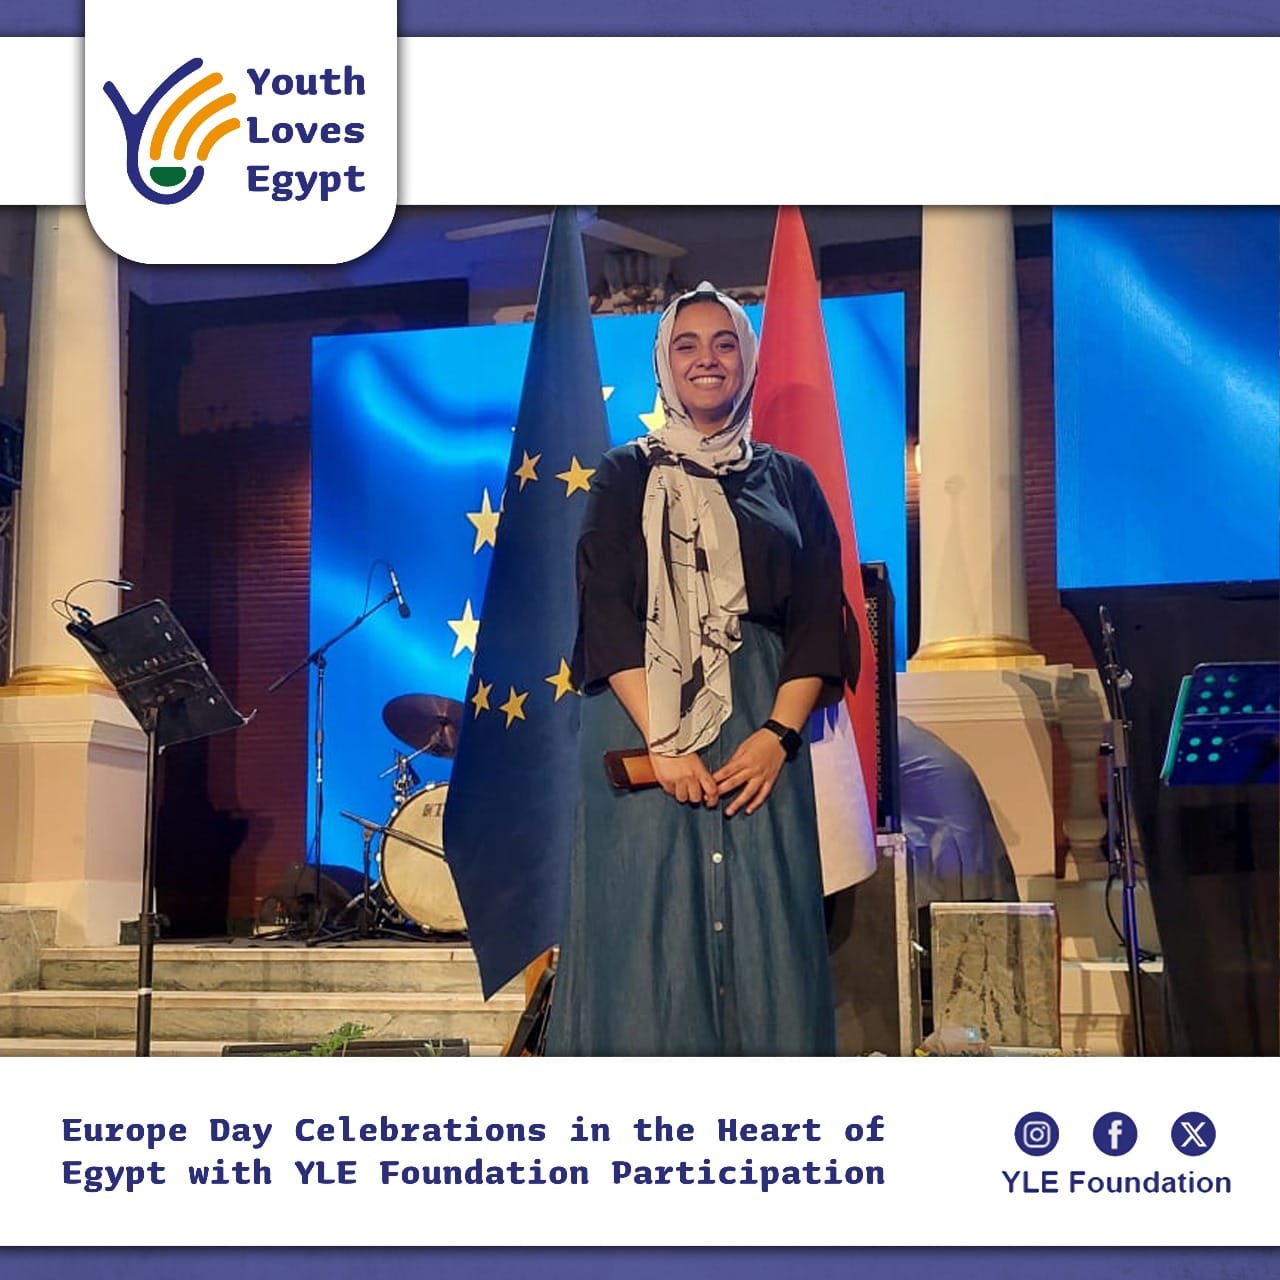 Celebrating Unity and Diversity Europe Day in Egypt with YLE Foundation Participation